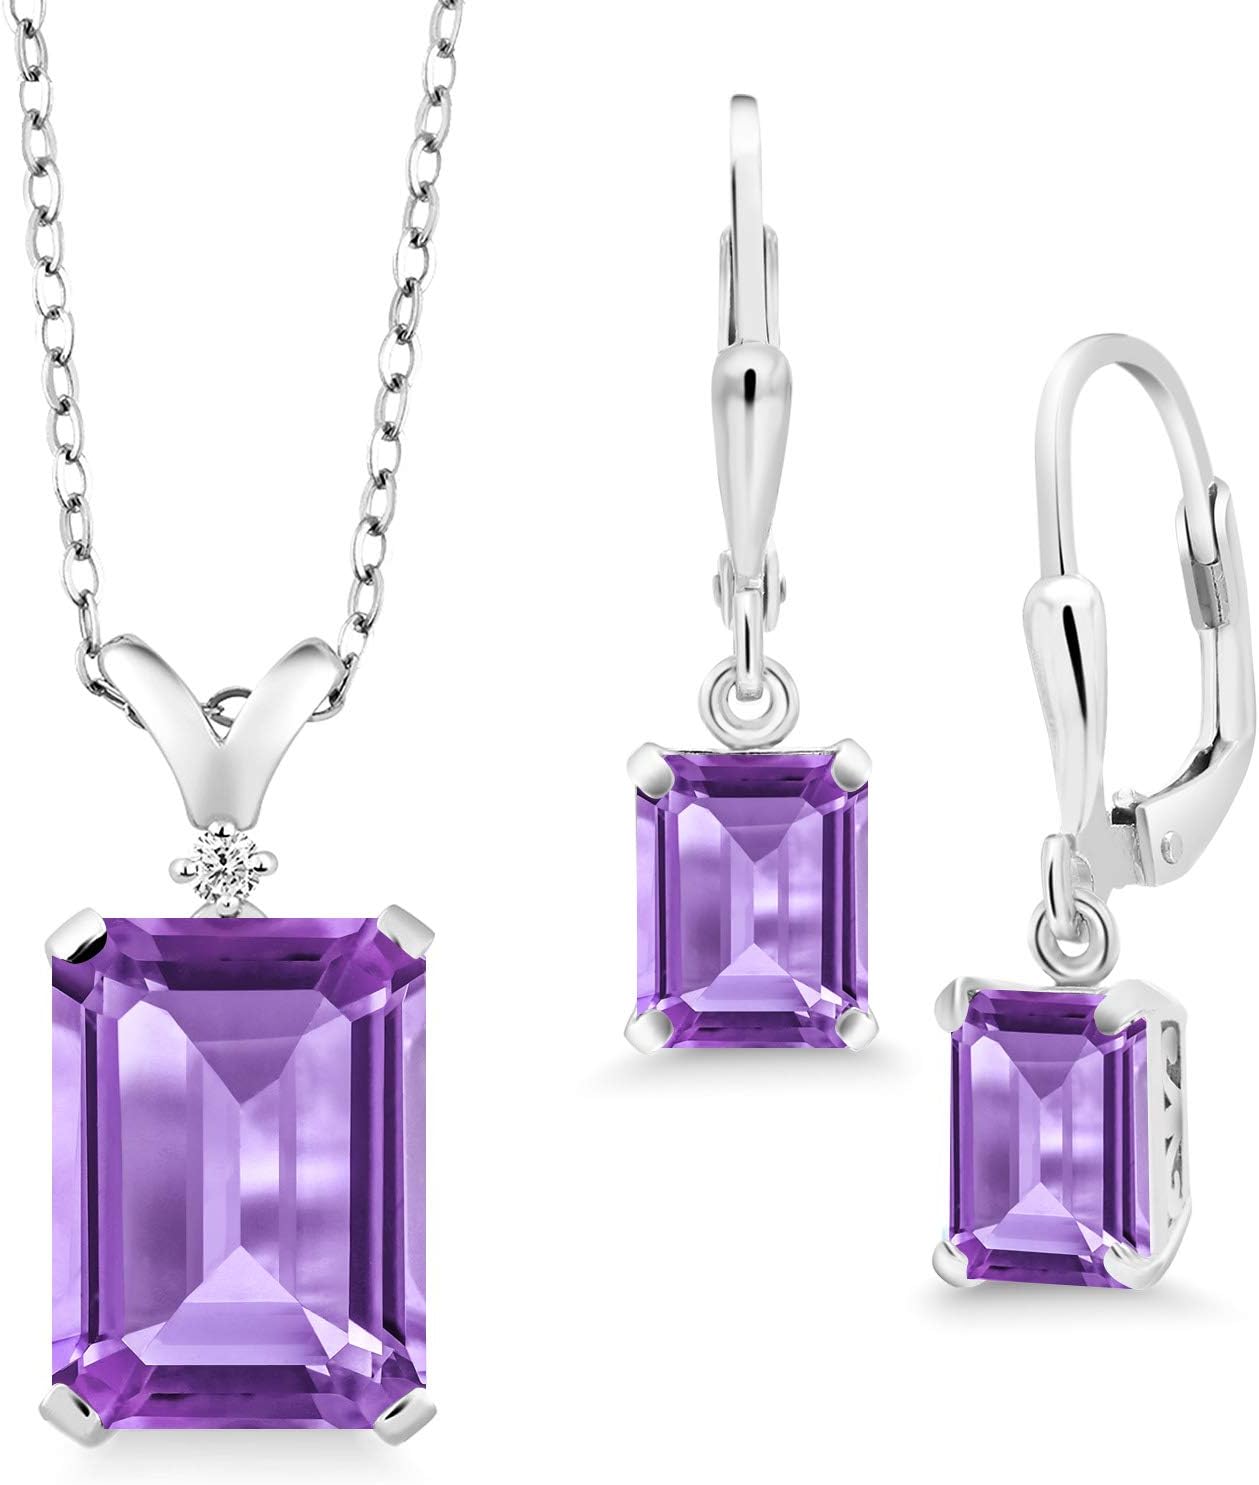 Gem Stone King 925 Sterling Silver Purple Amethyst Pendant and Earrings Jewelry Set For Women (9.27 Cttw, Gemstone Birthstone, Emerald Cut with 18 Inch Chain)